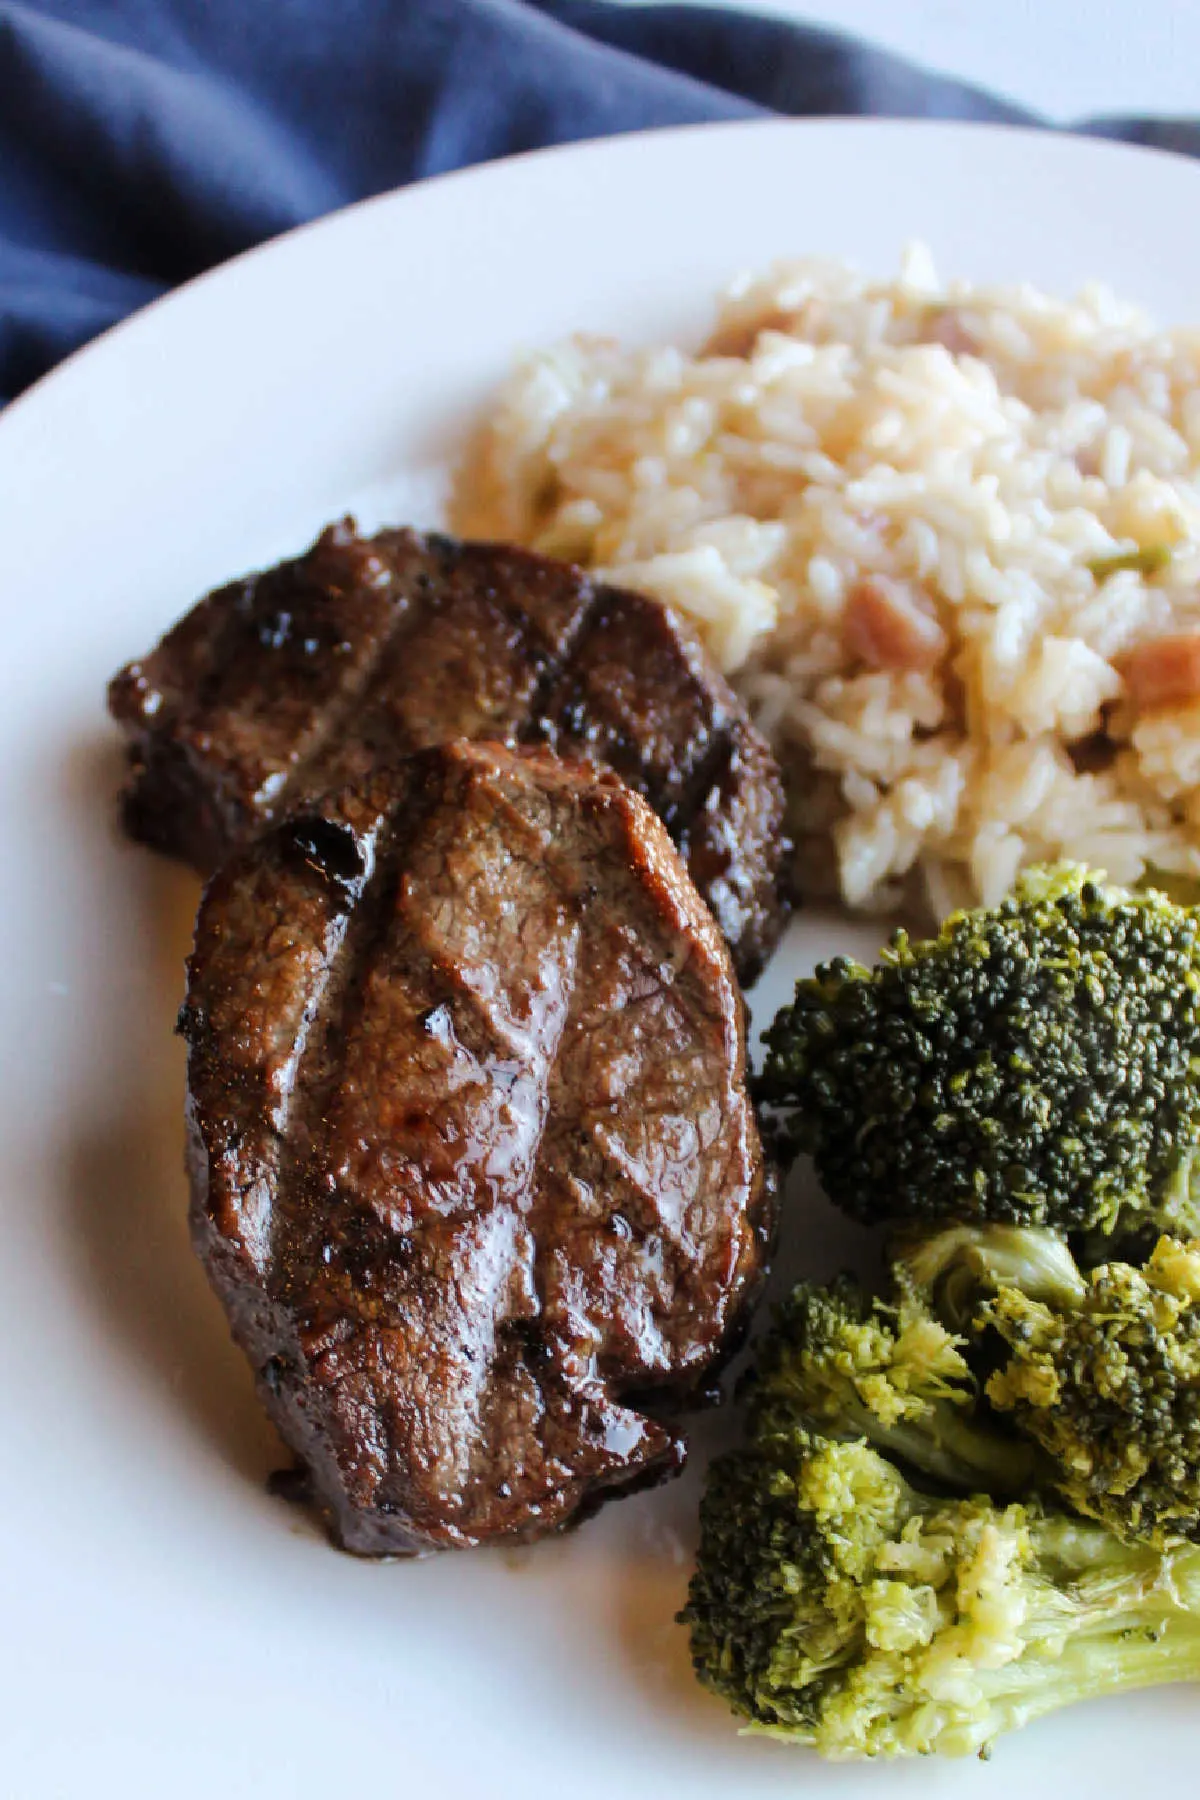 Grilled venison backstrap with bul kogi marinade on plate with broccoli and rice.